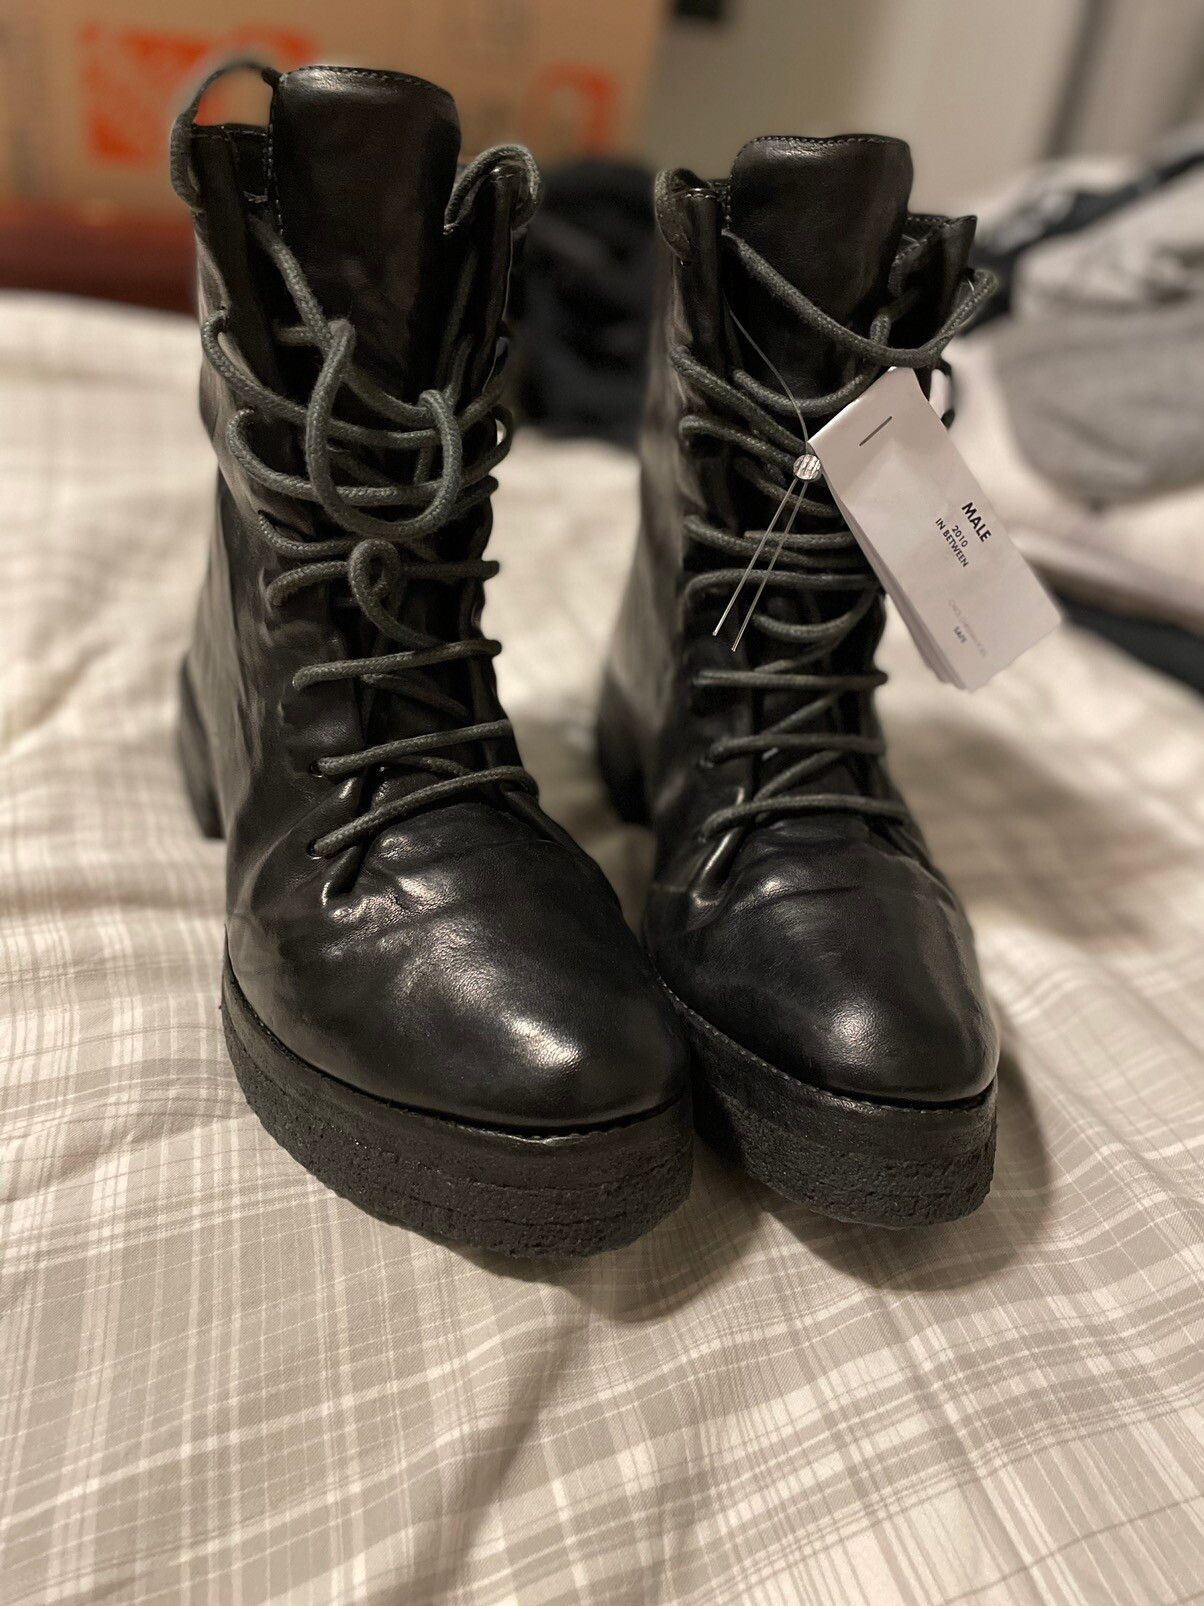 Carol Christian Poell CCP Combat Boots | Grailed